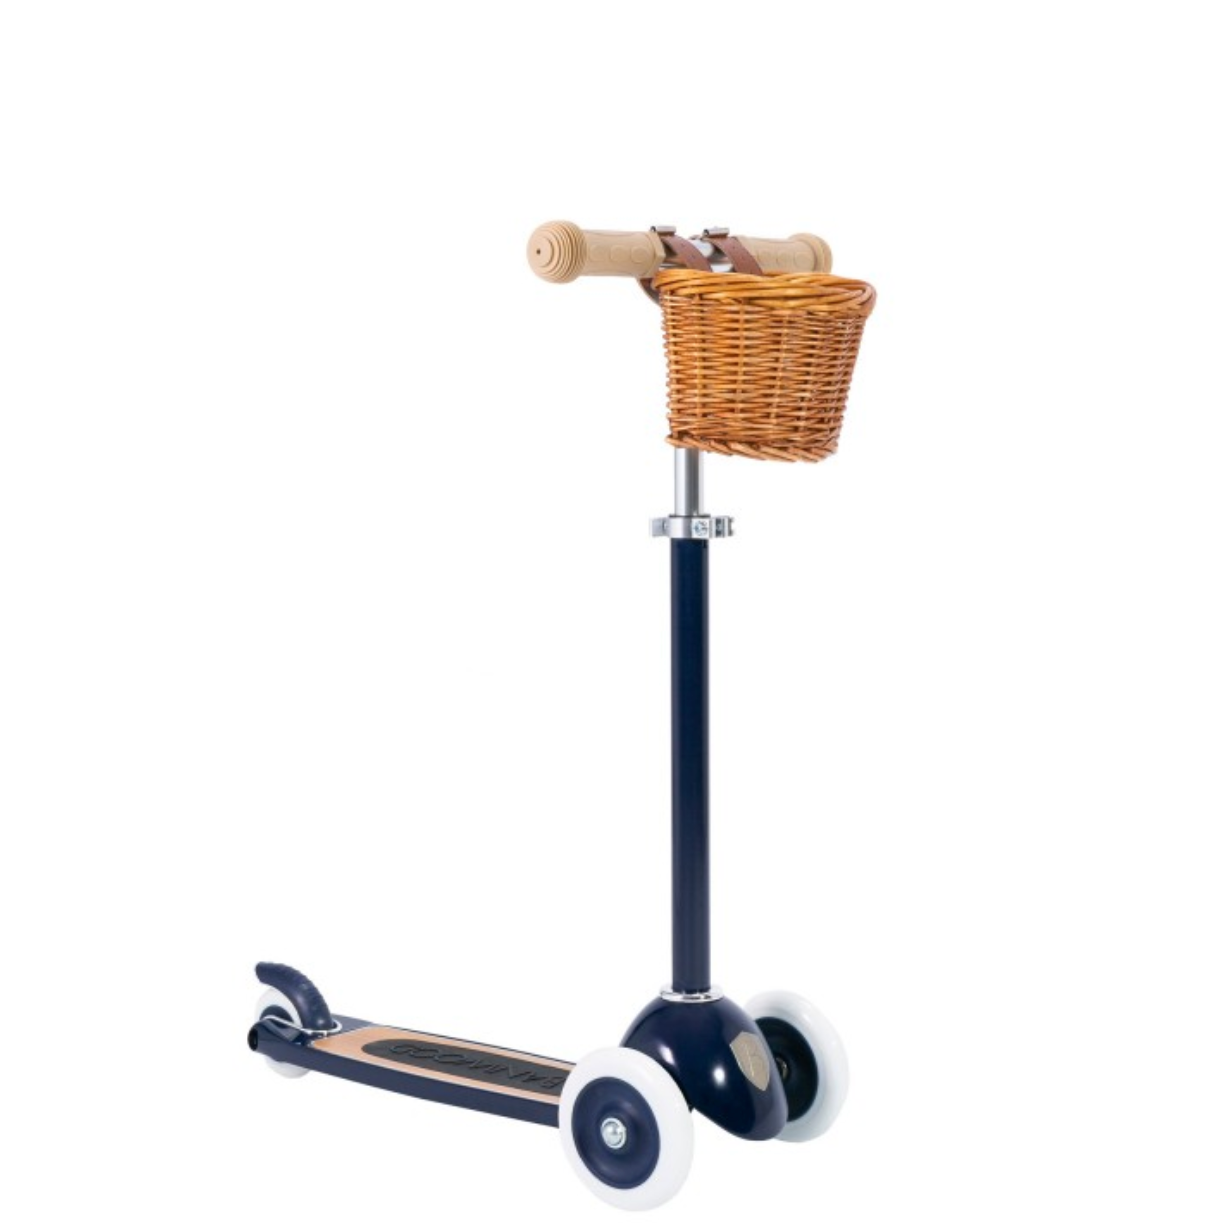 Banwood Scooter - Multiple Colors Avalable